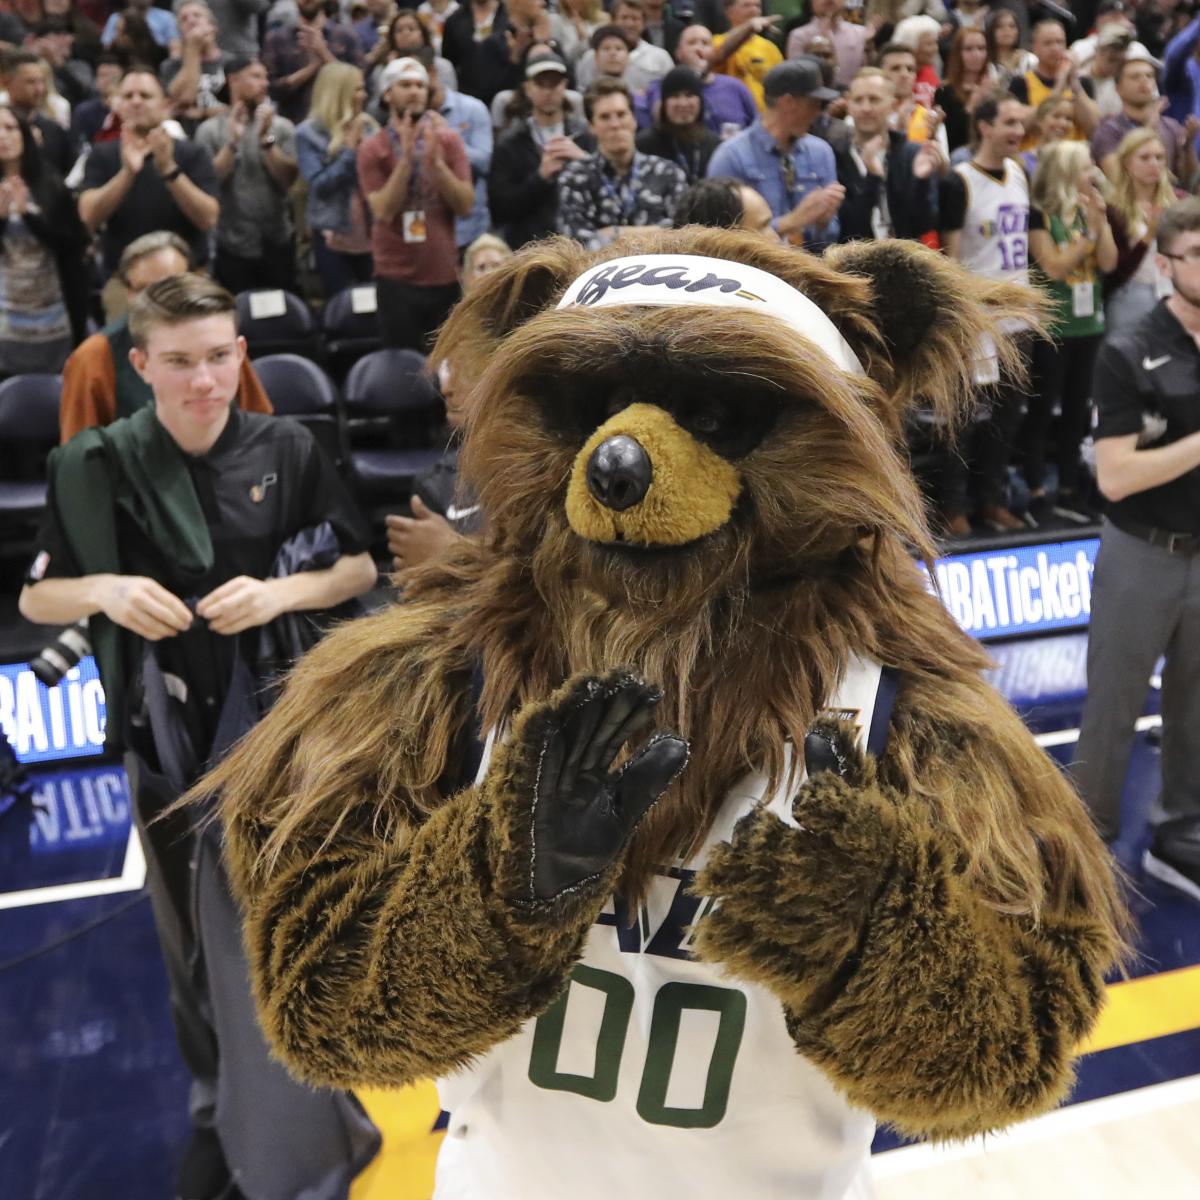 Jazz mascot bulldozes Clippers fan who pushed kid during on-court race